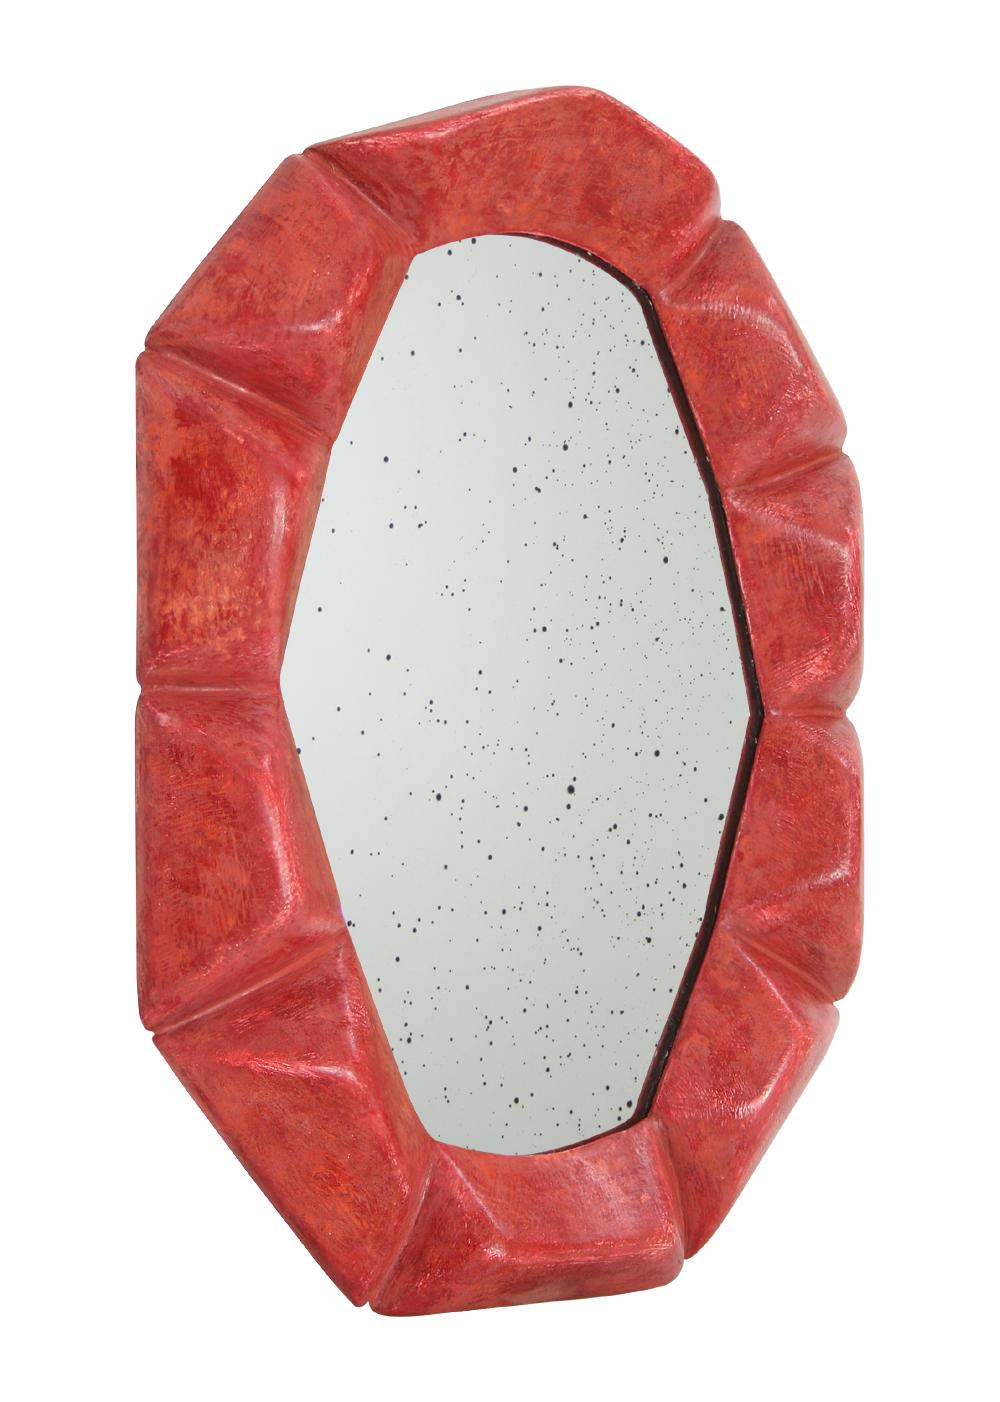 Contemporary artistic mirror. Sculptural composition in the shape of a face, hand carved. Original creation of materials and colors. Limited edition, number 1 out of 8. In the back, signed by Pascal & Annie Leniau, year 2003, model 01 / 08.